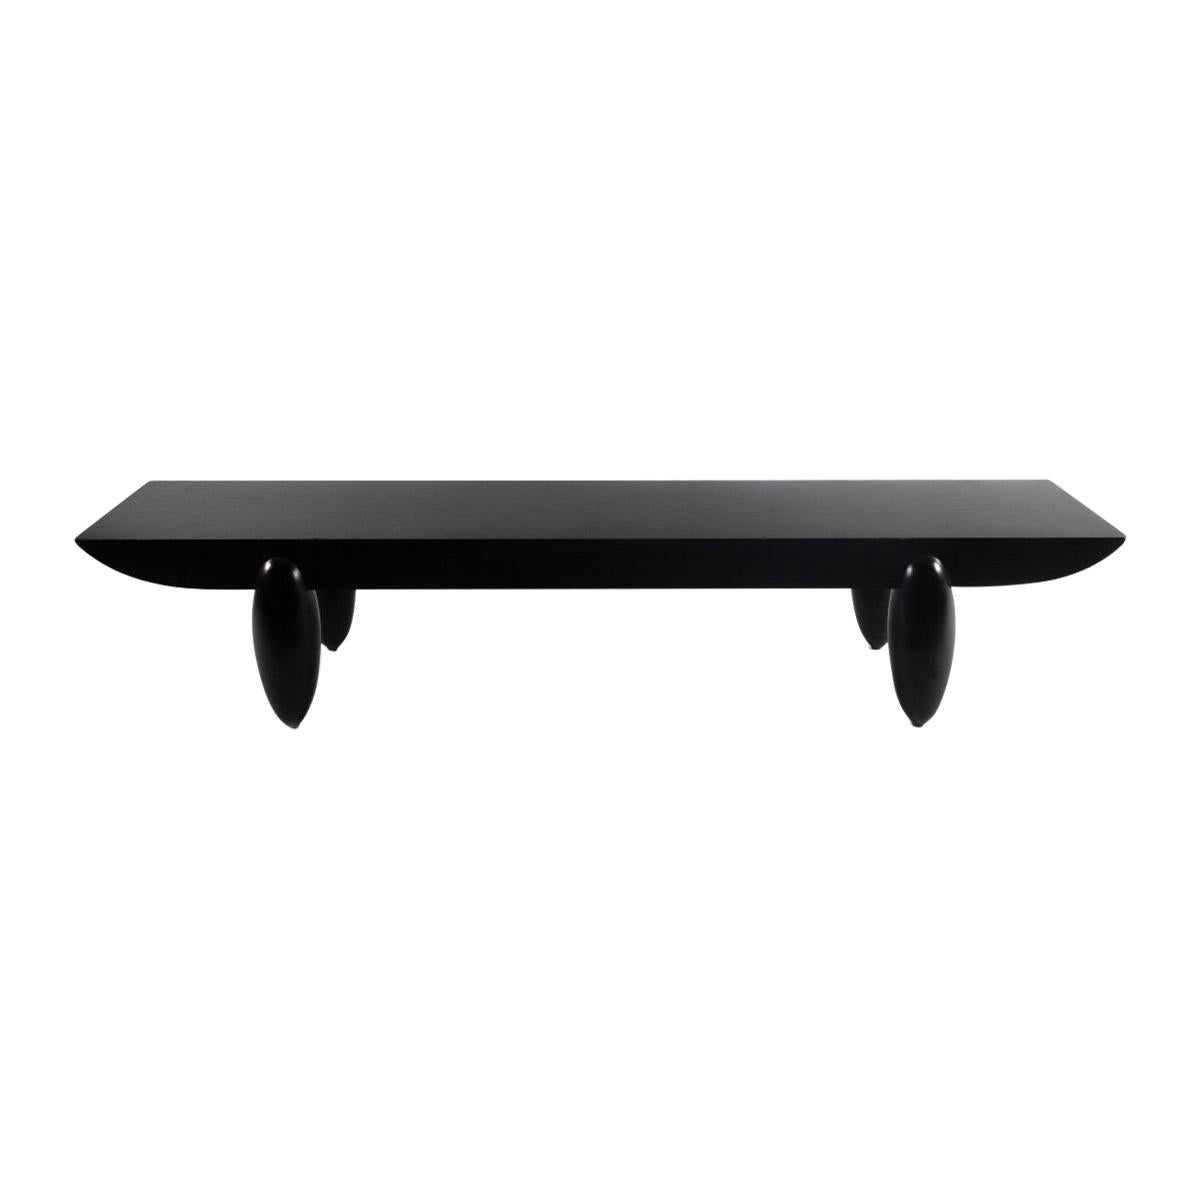 Christian Liaigre Ebonized Wood Bench / Low Table